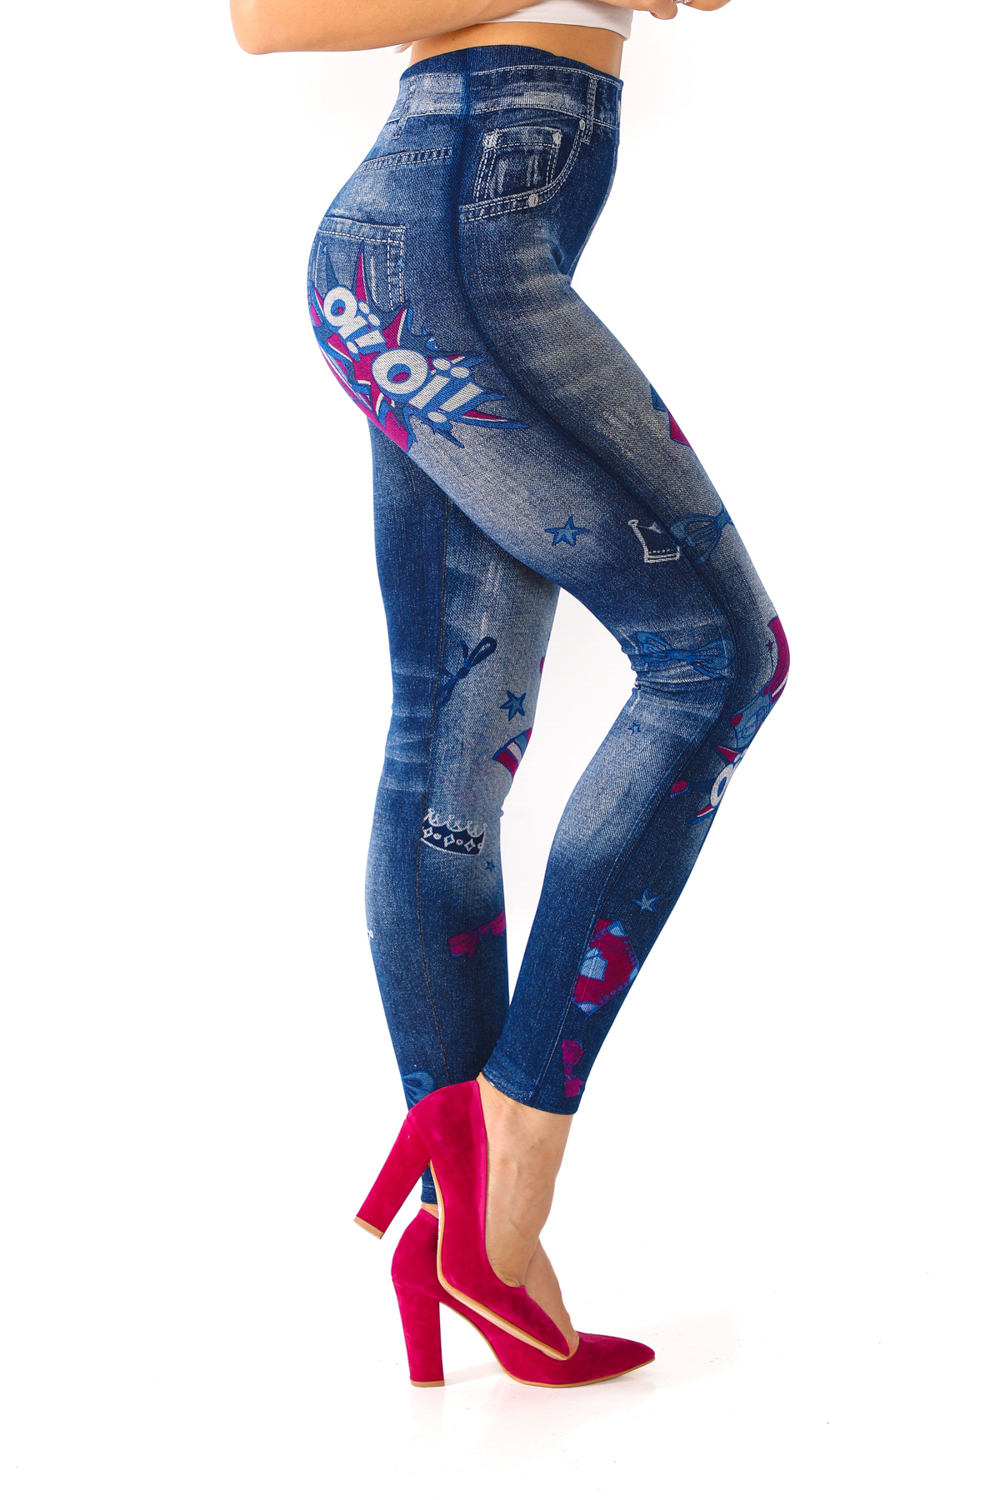 Denim Leggings with Floral Pattern Fake Pockets - Its All Leggings